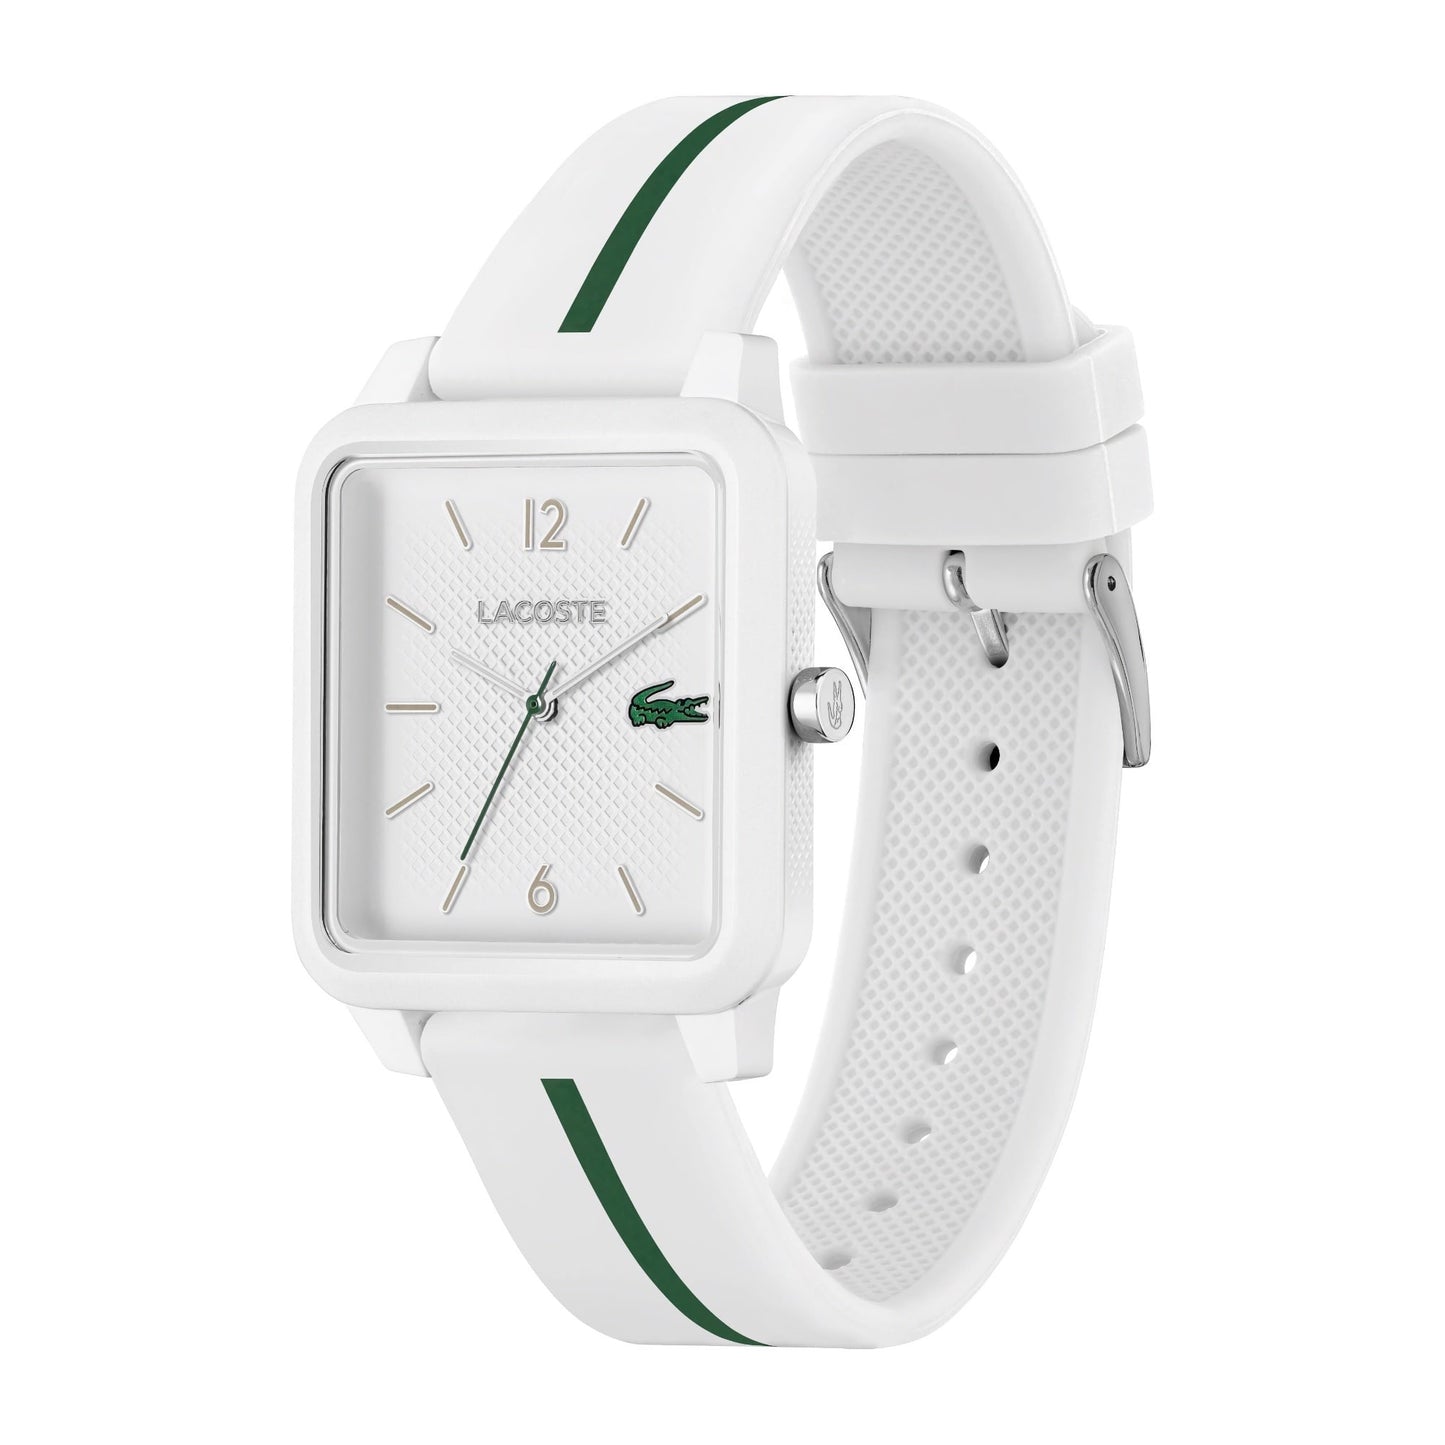 A Lacoste.12.12 Studio 3 Hands Watch White Silicone with a green stripe.